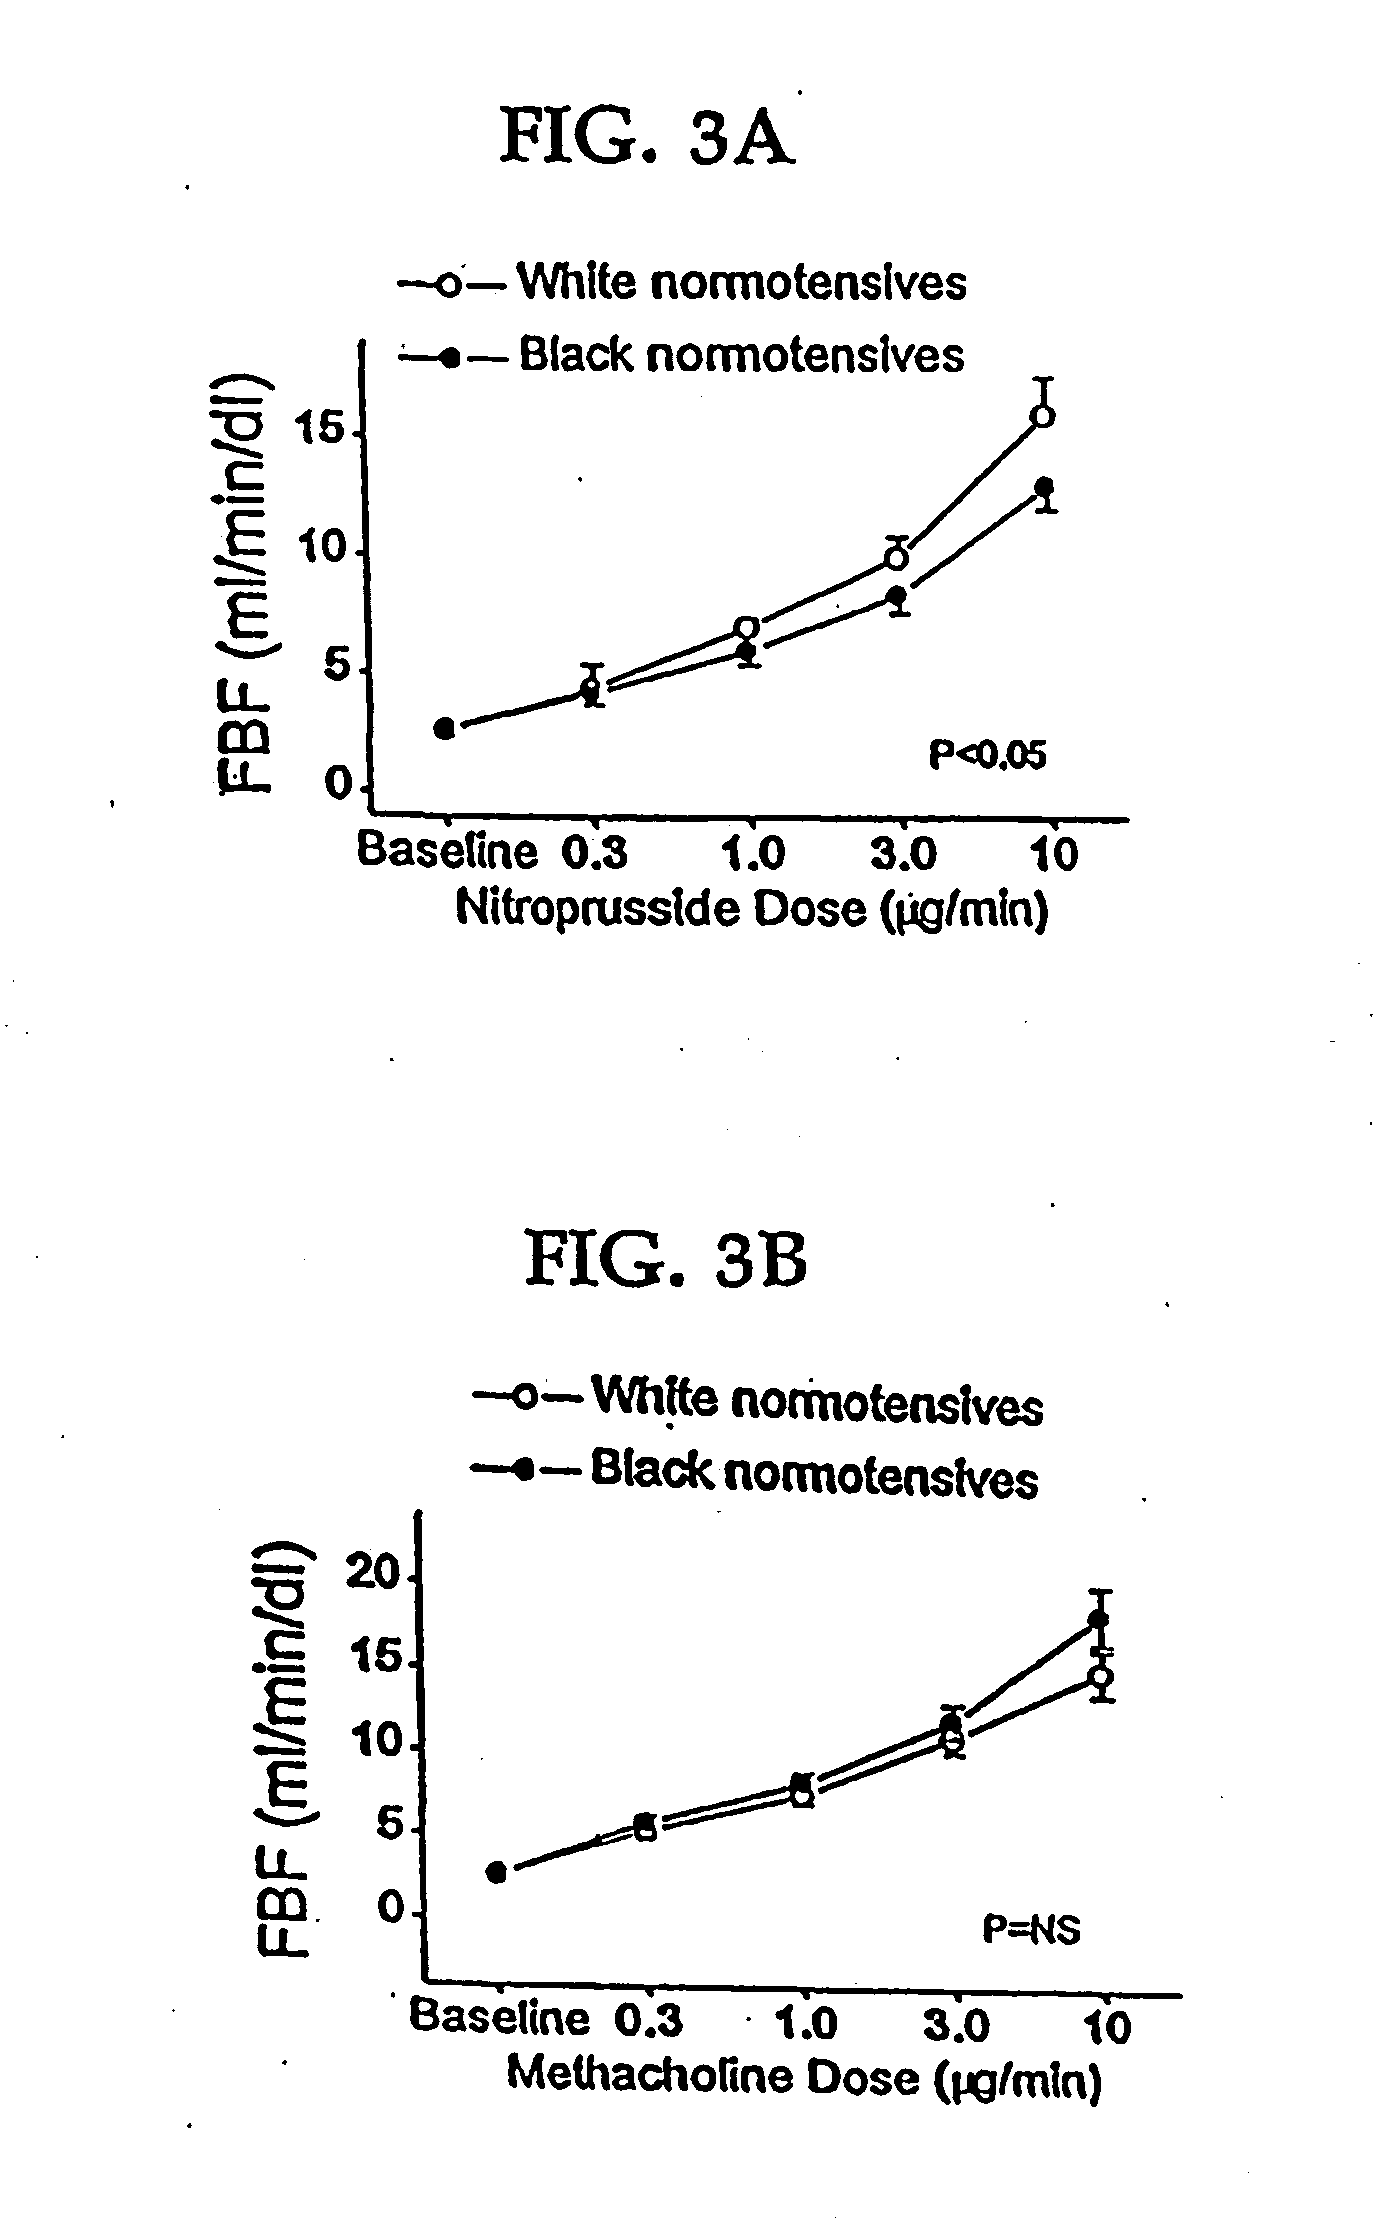 Methods of treating vascular diseases characterized by nitric oxide insufficiency